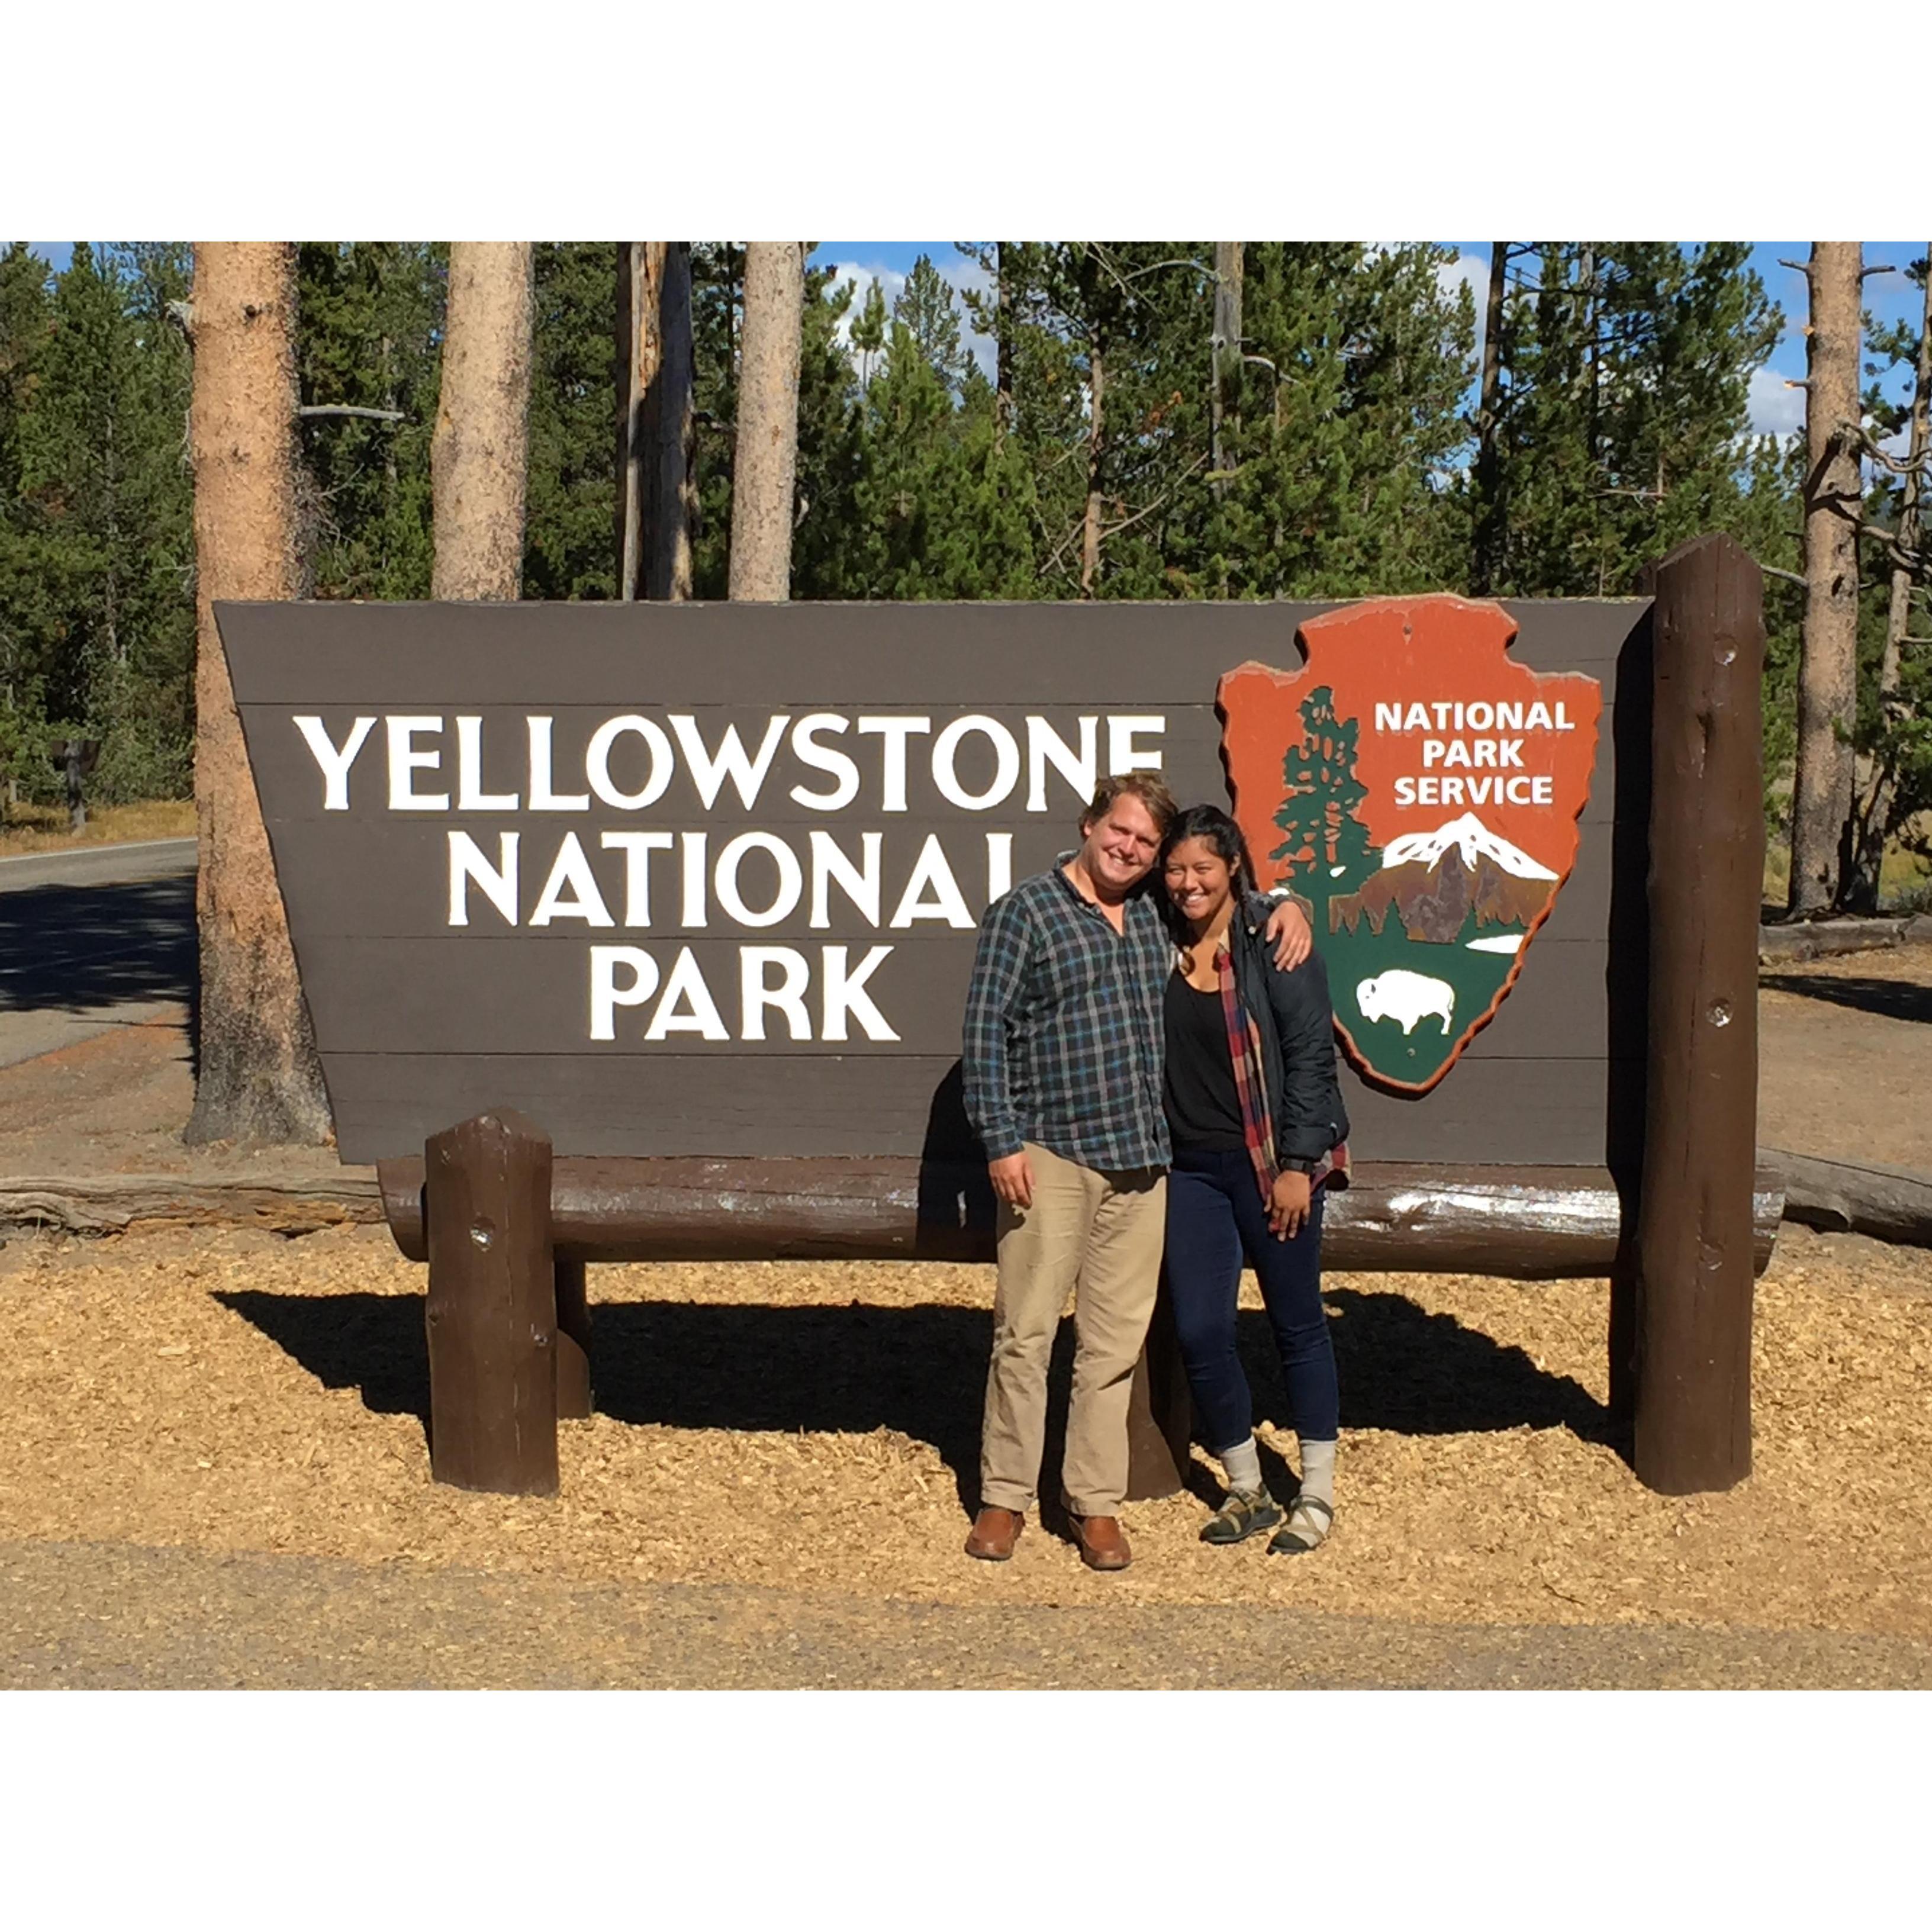 Road trip 2016 continued (Yellowstone)